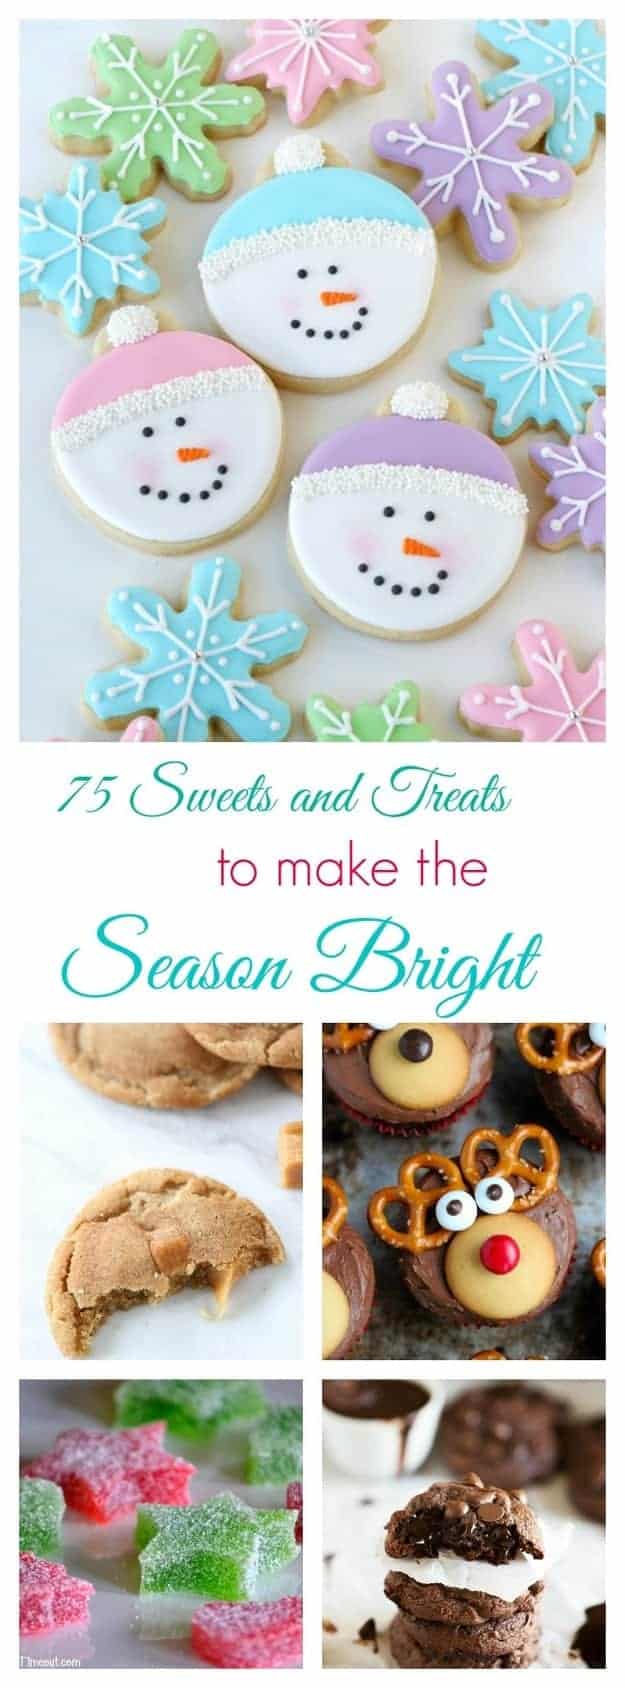 75 Sweets and Treats for the Holidays! Find all o your easy Christmas desserts and Thanksgiving desserts in one easy spot!